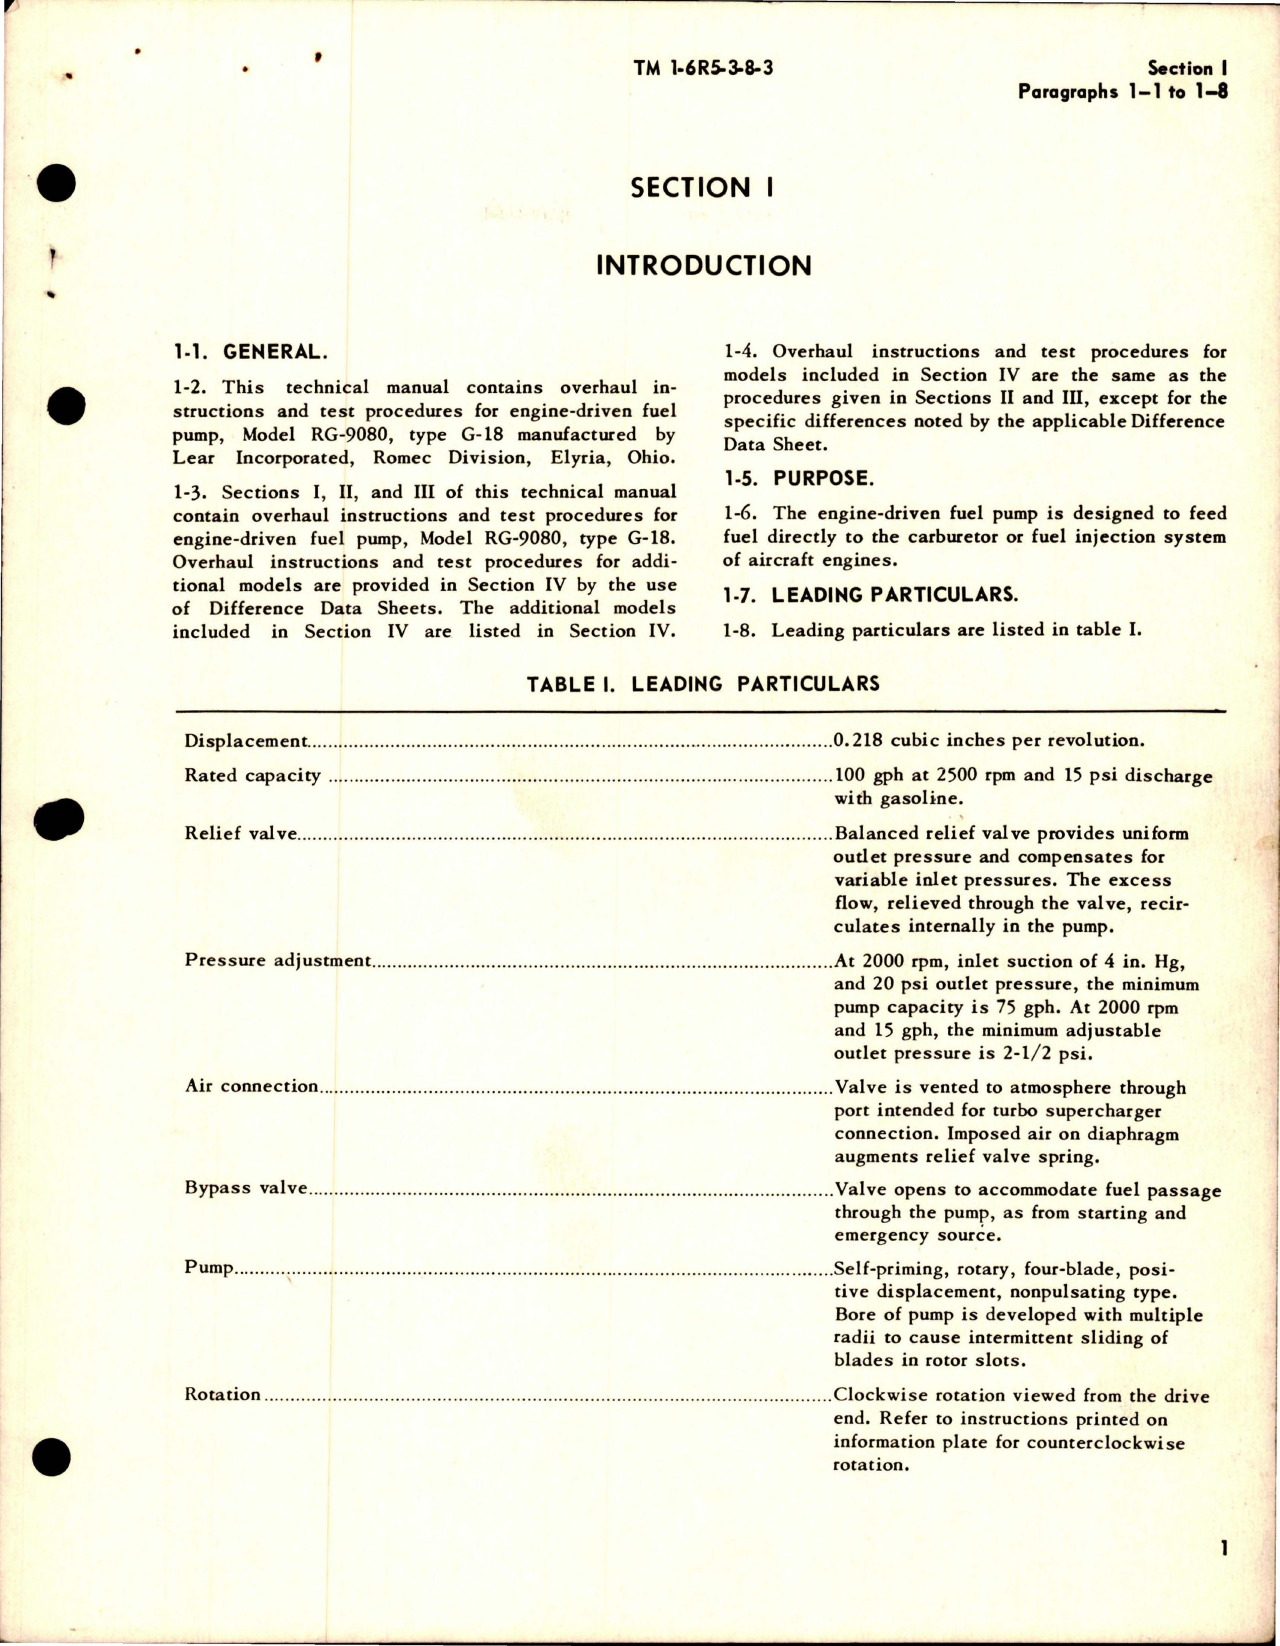 Sample page 5 from AirCorps Library document: Overhaul Instructions and Test Procedures for Engine Driven Fuel Pump - Model RG-9080 - Type G-18 